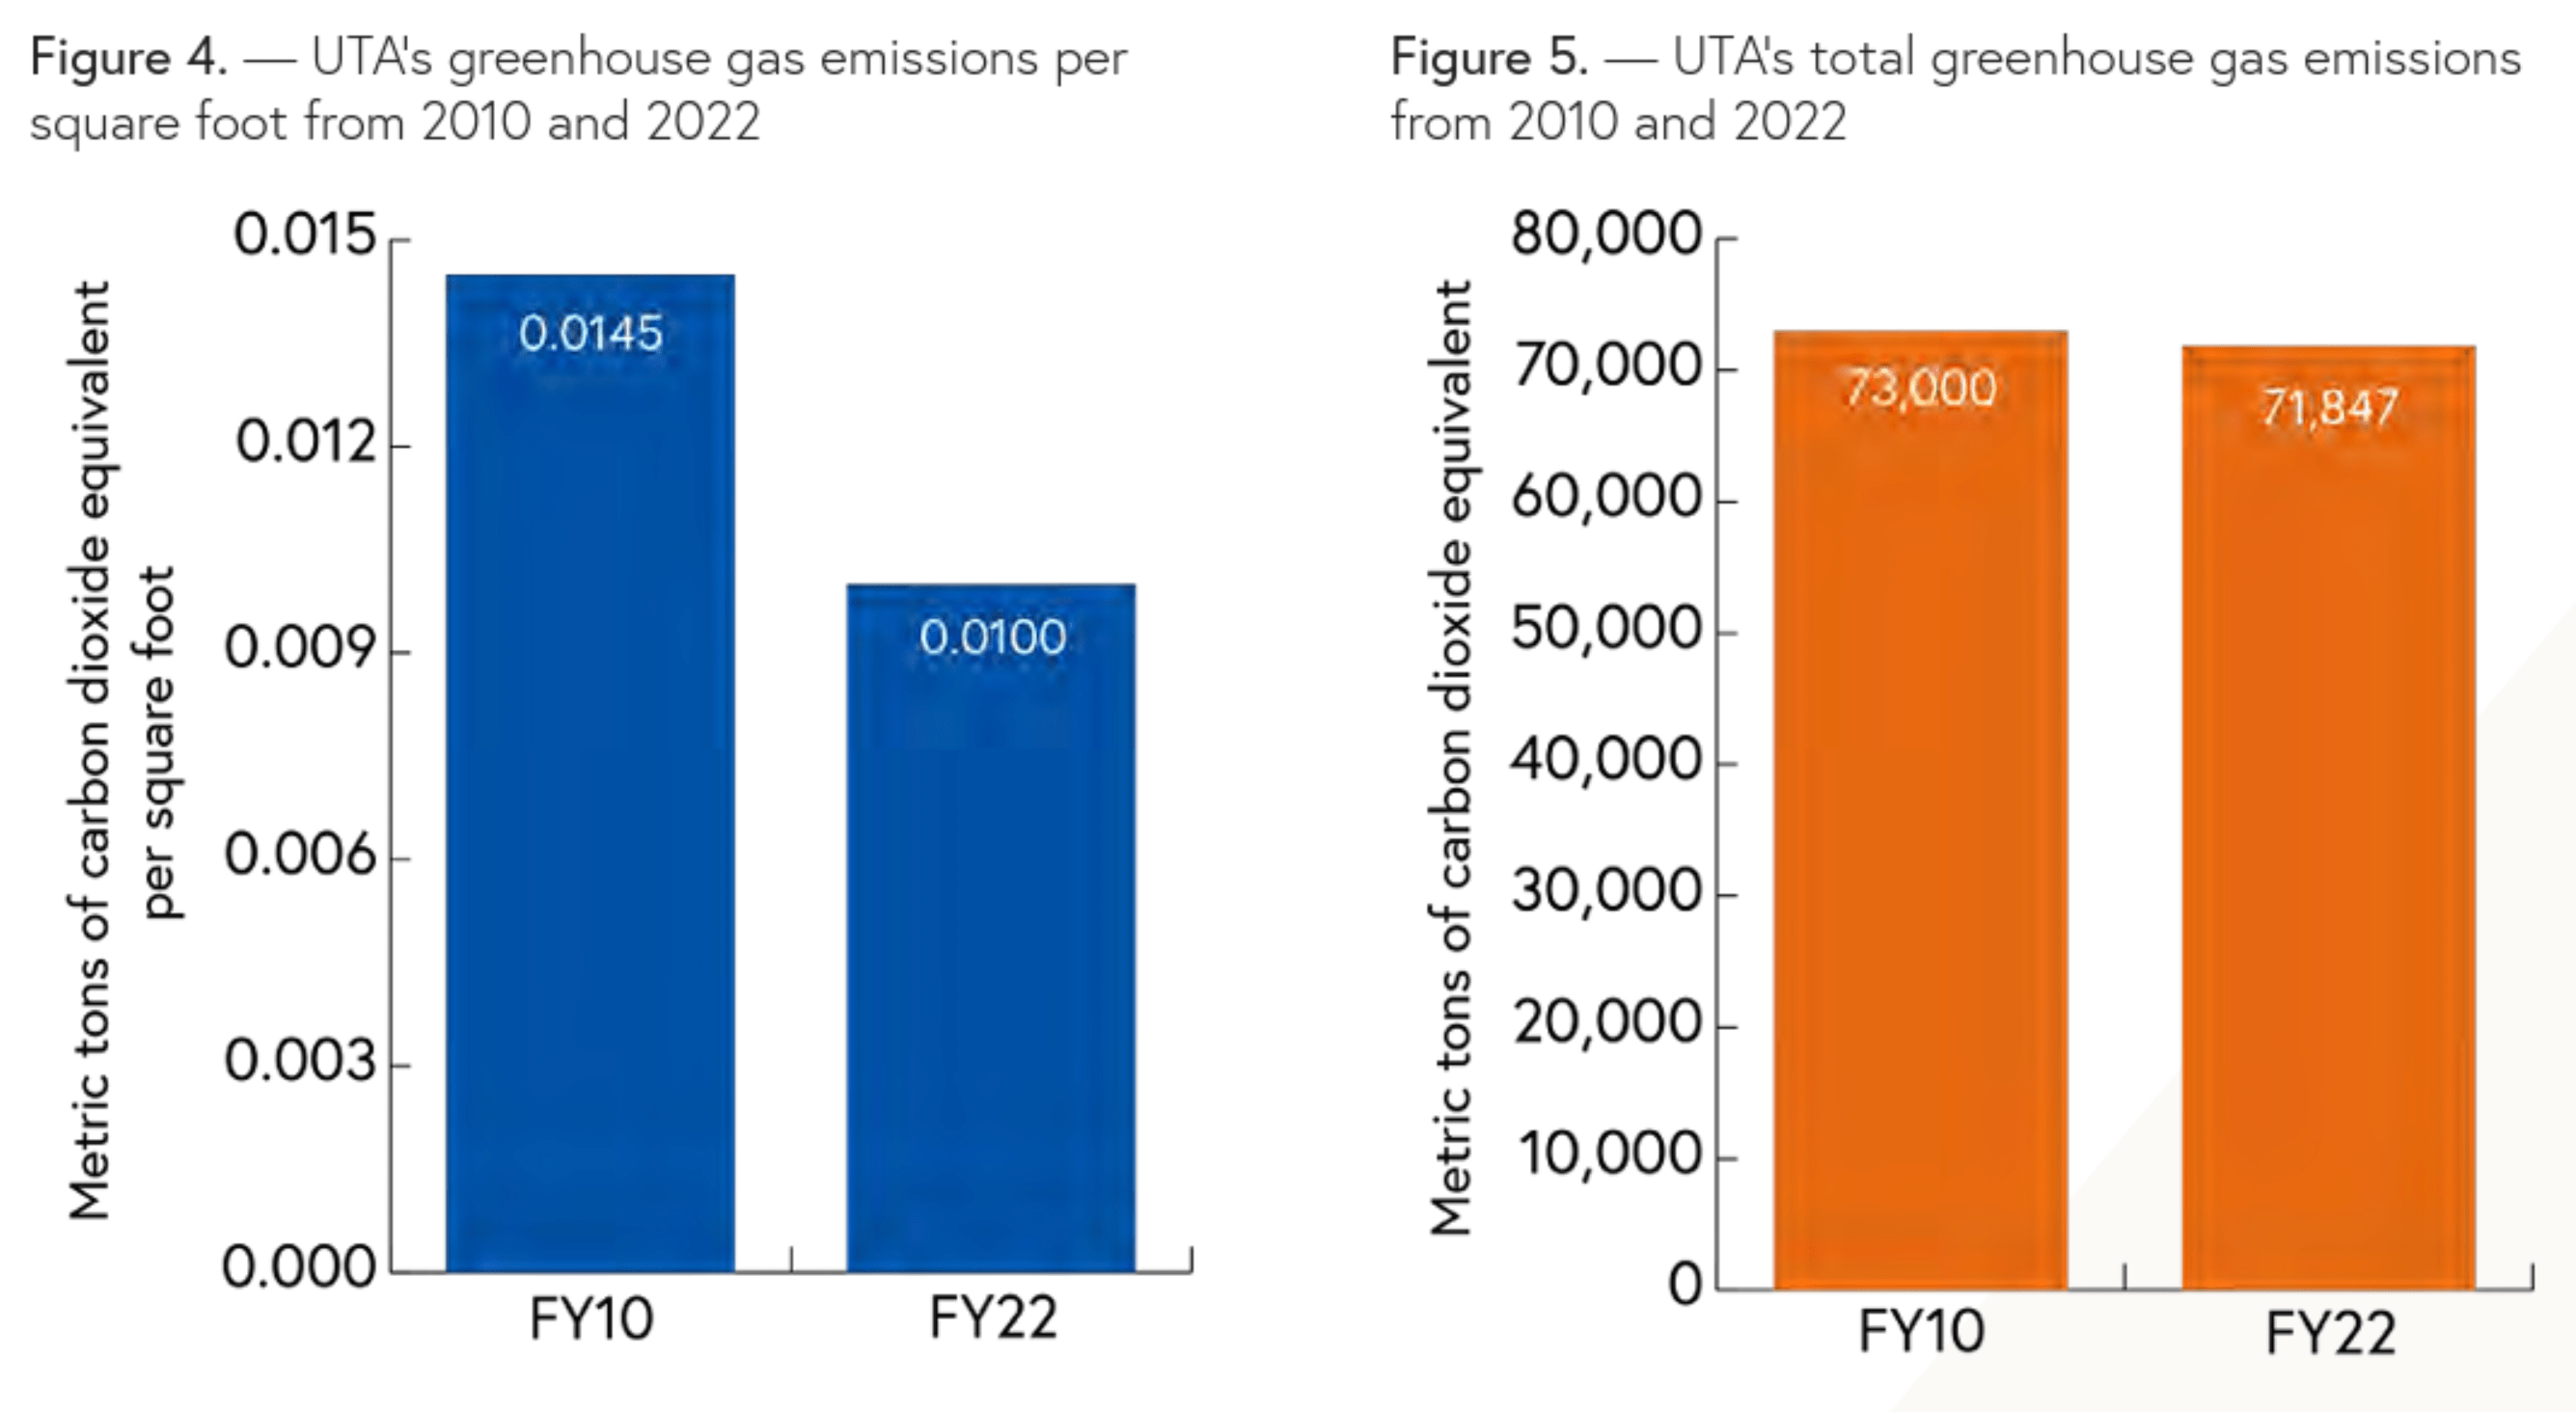 UTA's Greenhouse Gas Emissions per square foot from 2010 to 2022 and UTA's Total Greenhouse Has Emissions from 2010 to 2022